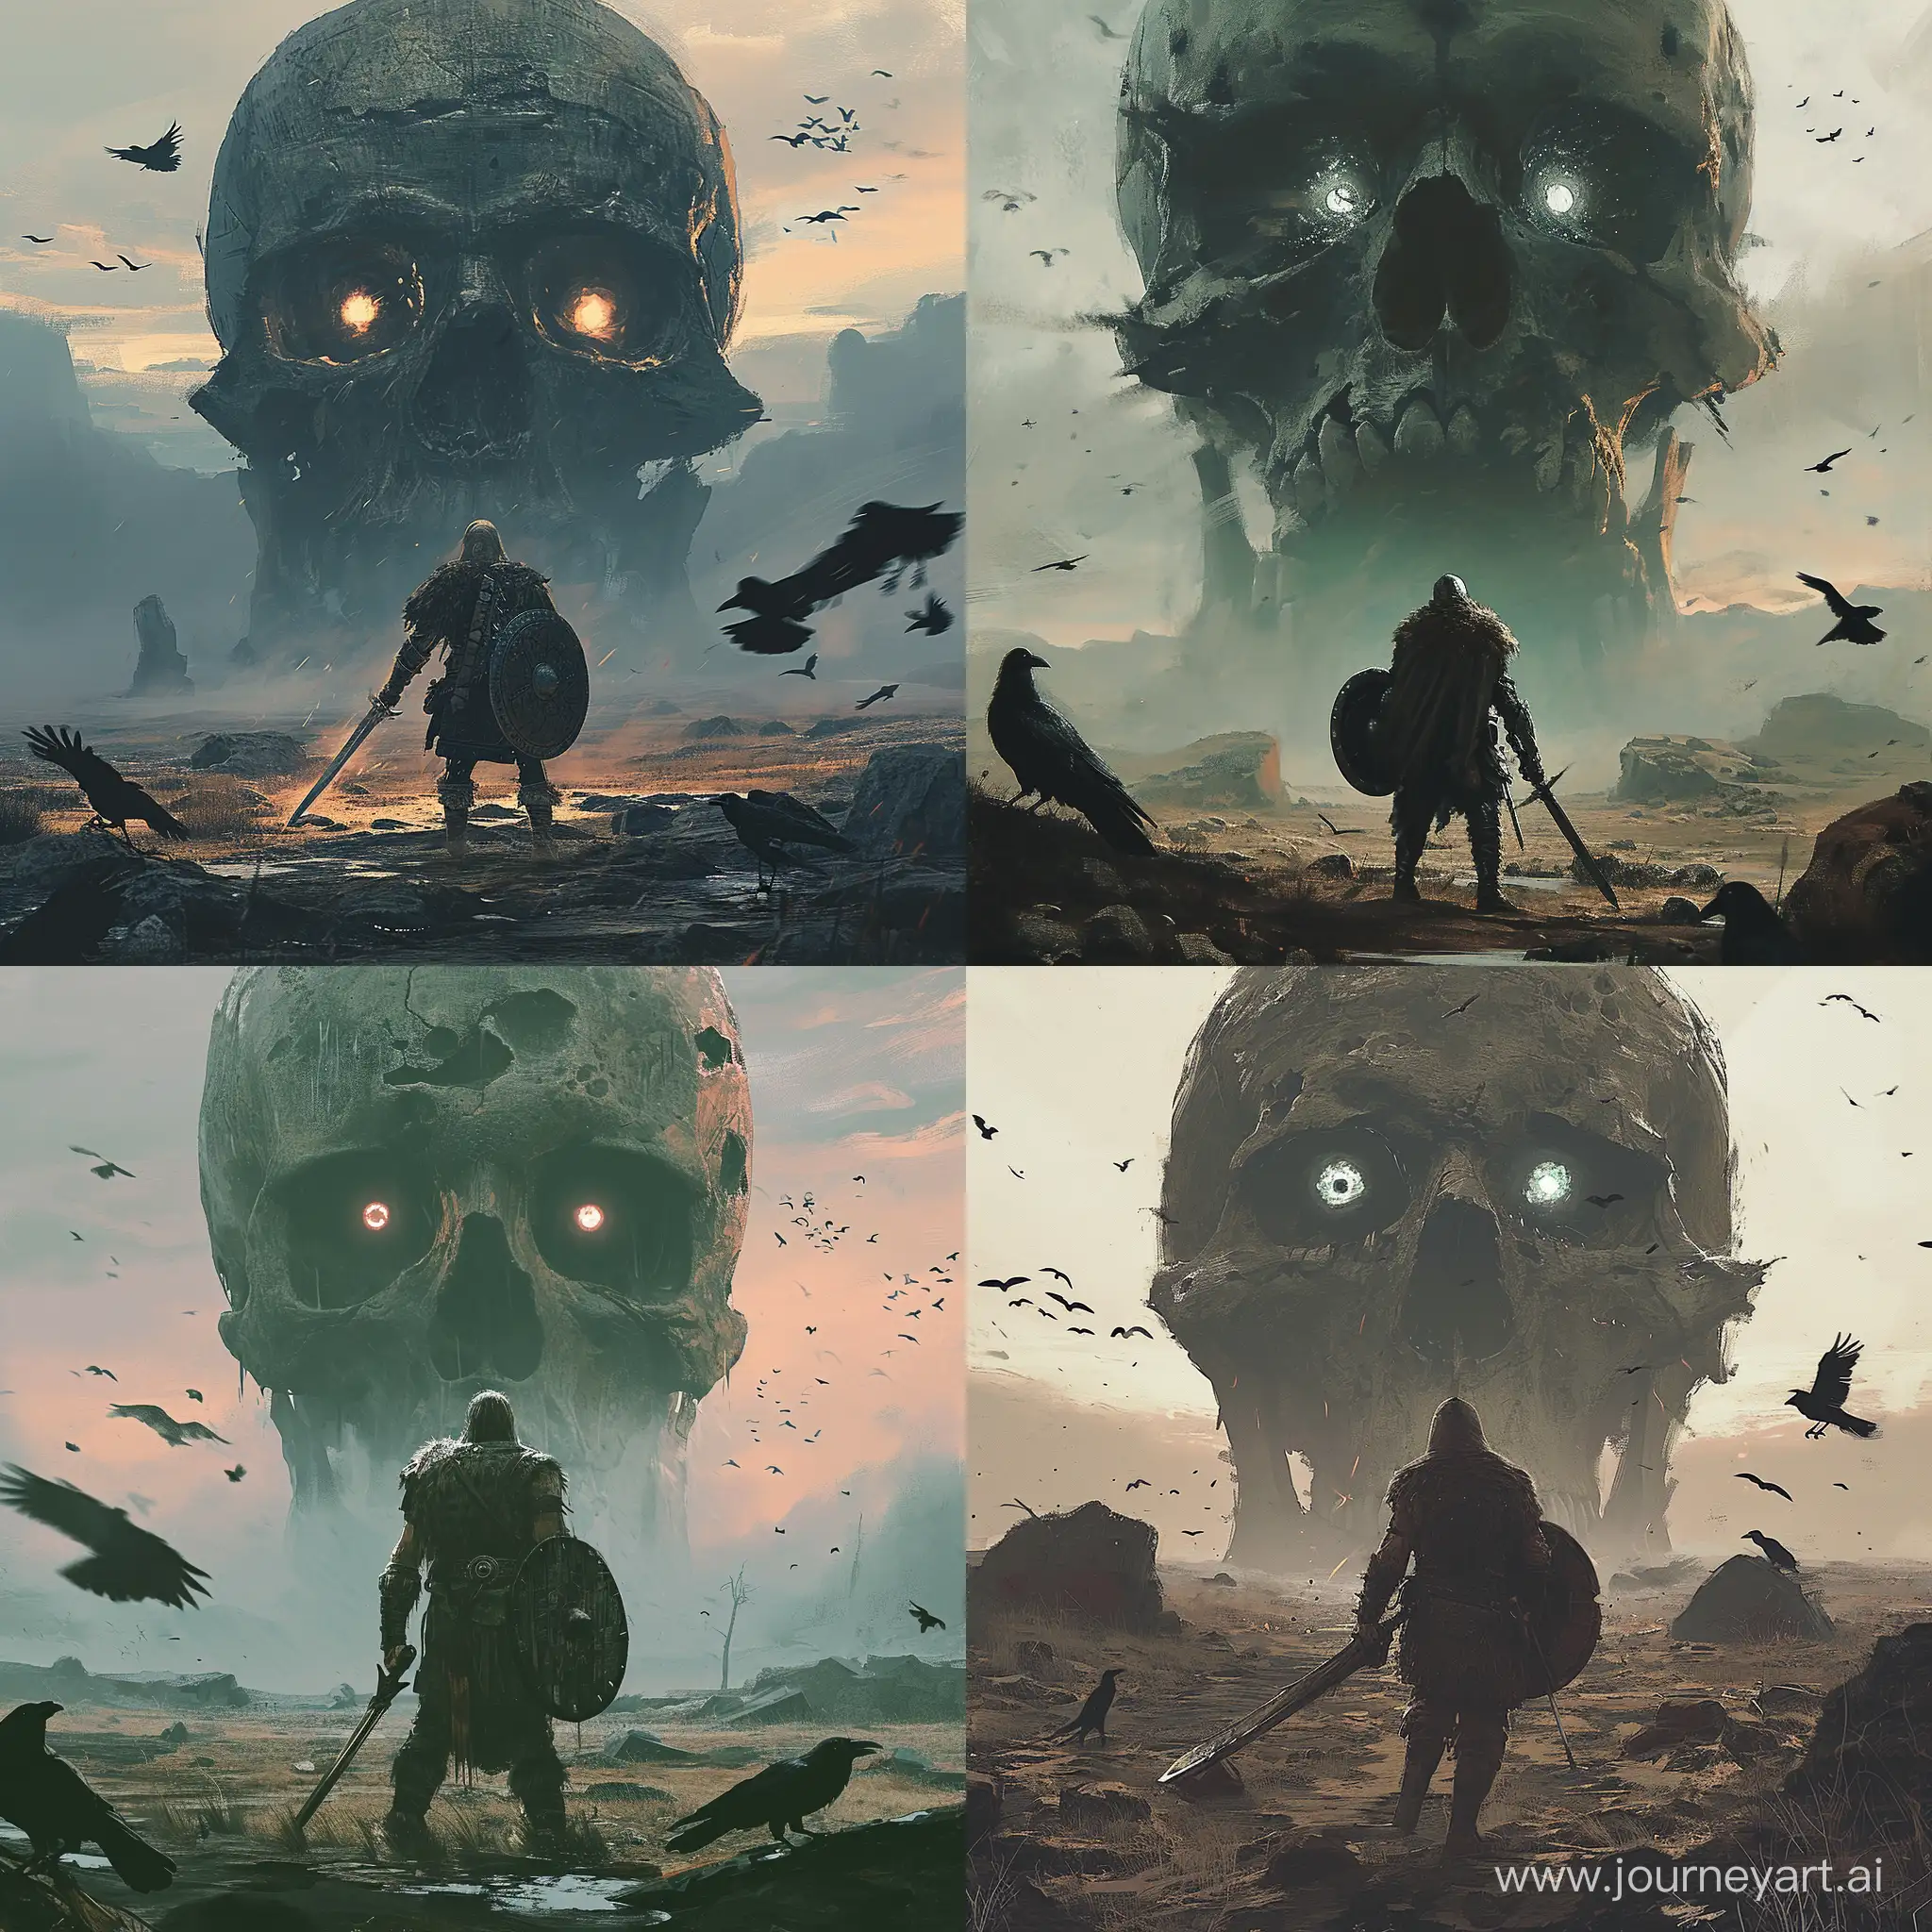 A warrior stands in a desolate land with a giant skull looming above them. The warrior is equipped with a sword and shield, there is a skull with glowing eyes in the background. The scene is set at dusk, there are crows flying around. --v 6